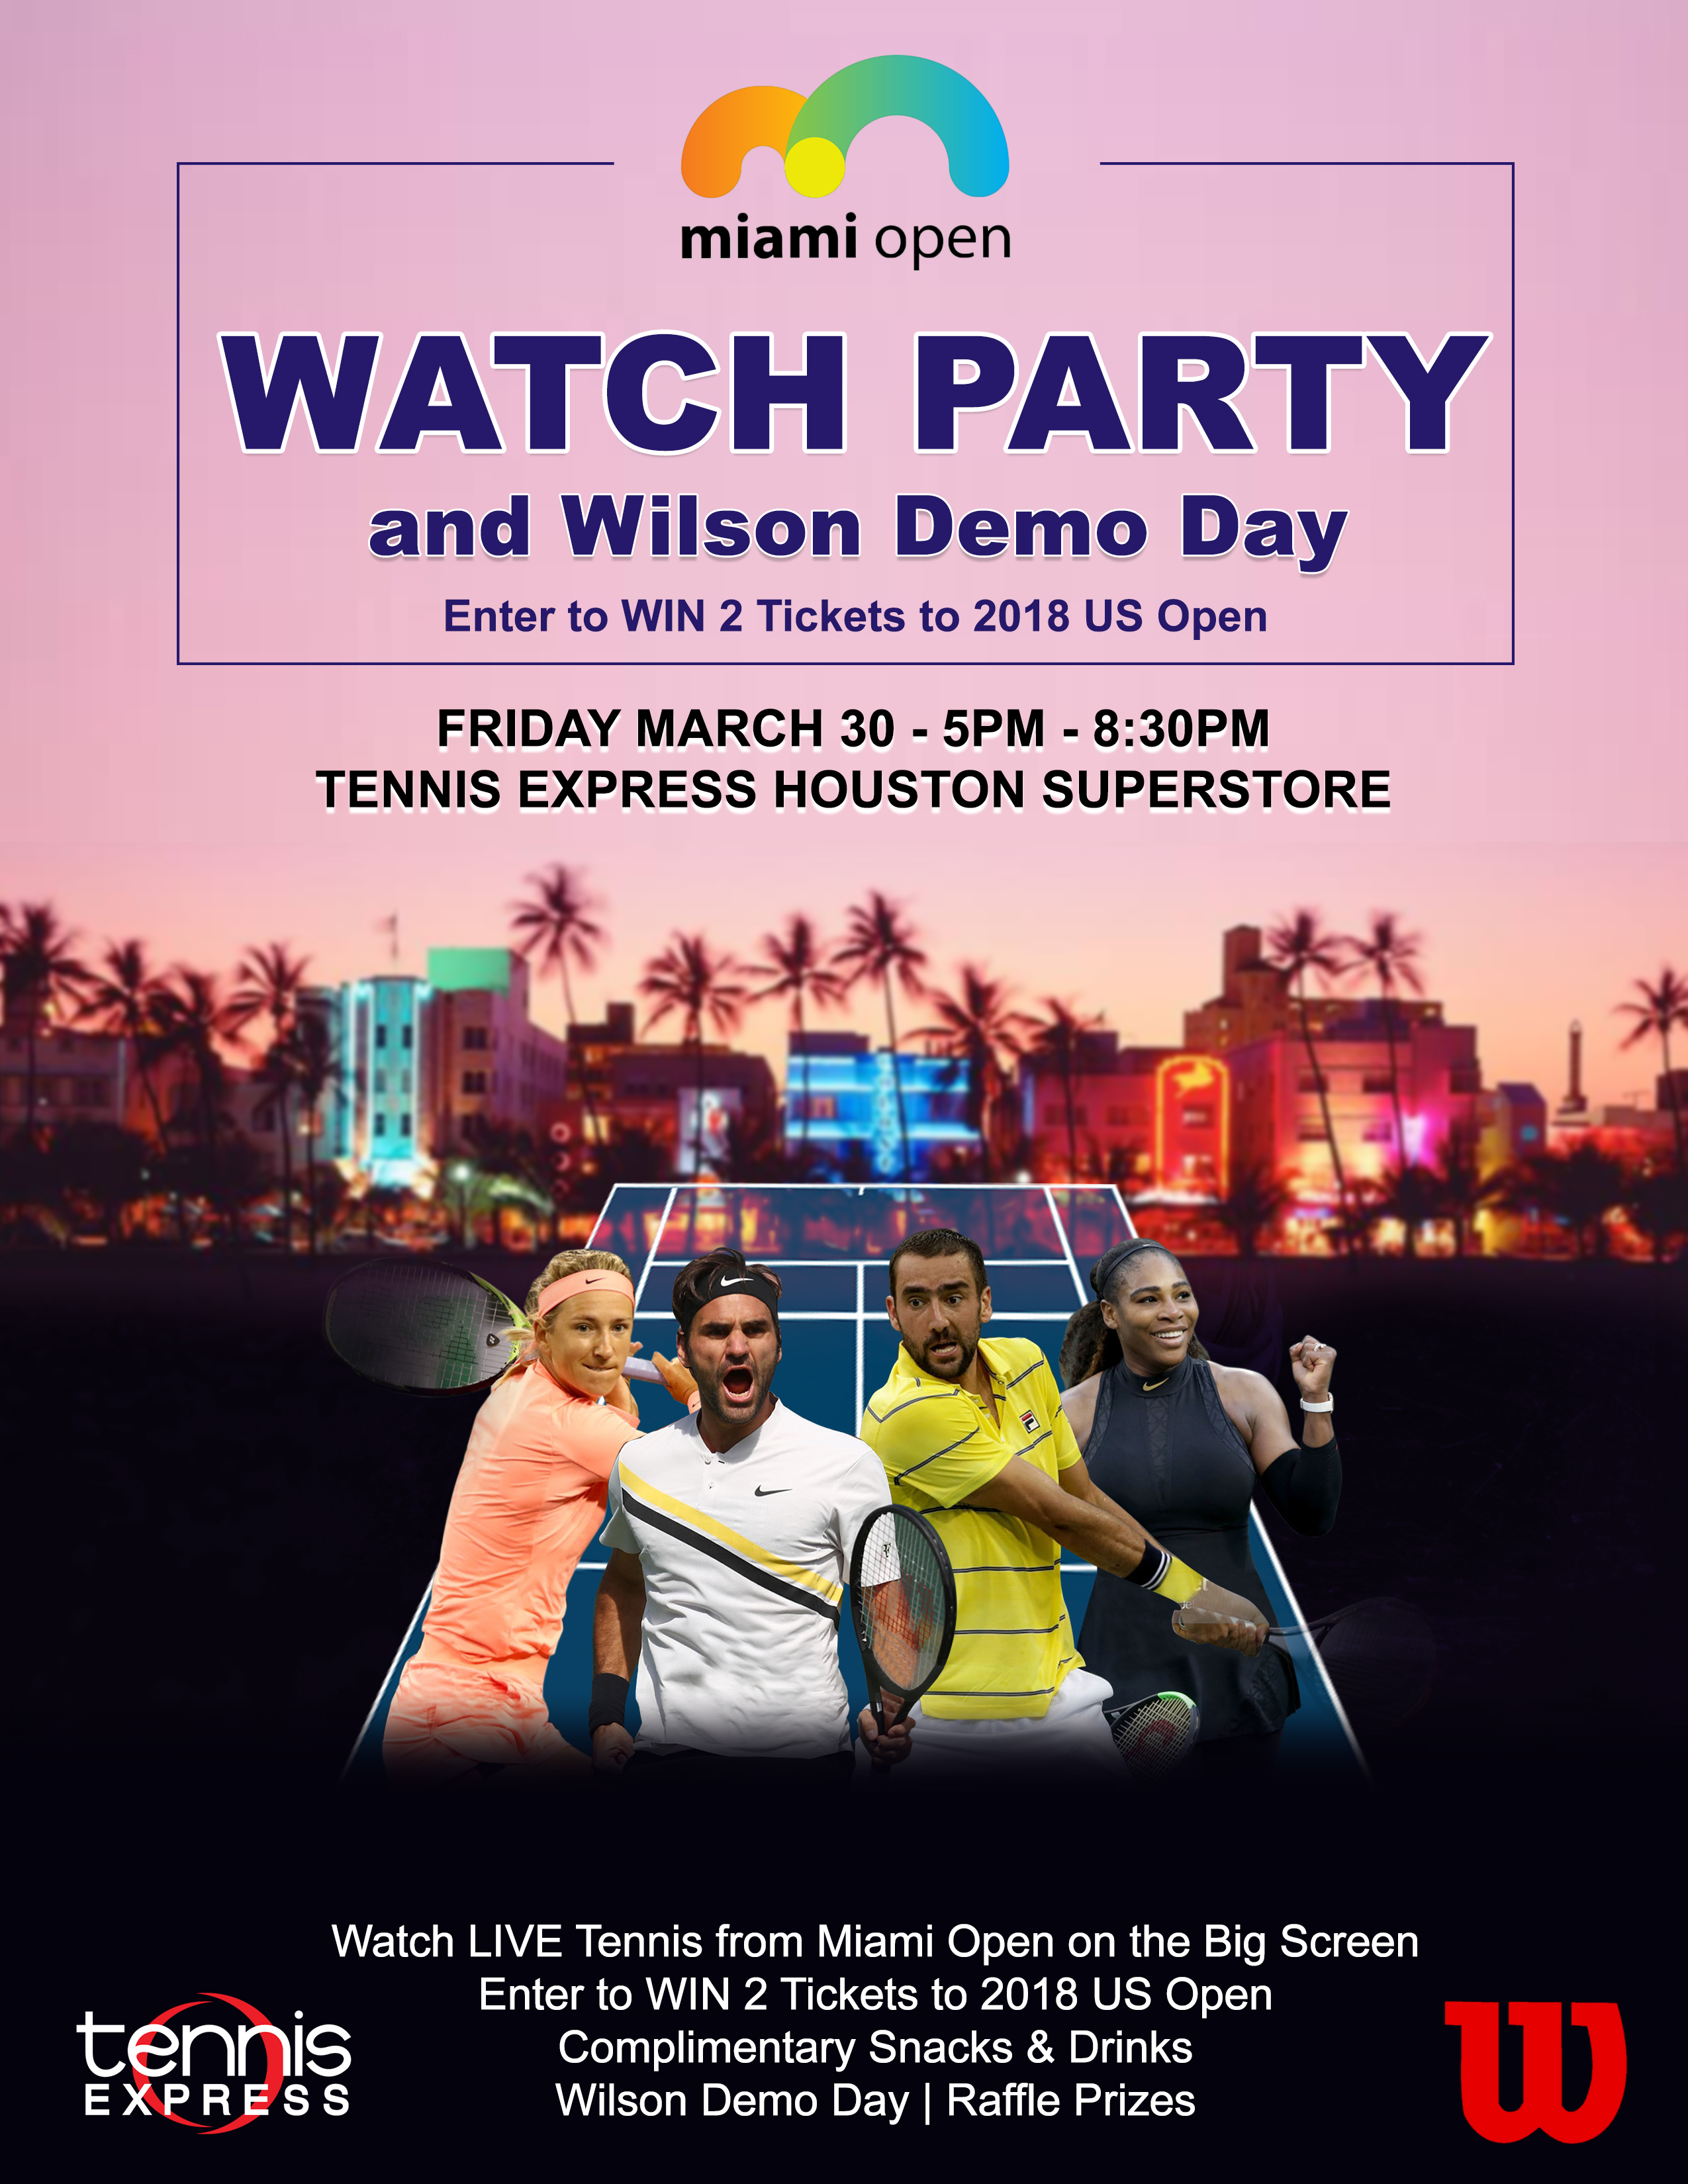 2018 Miami Open Watch Party at Tennis Express